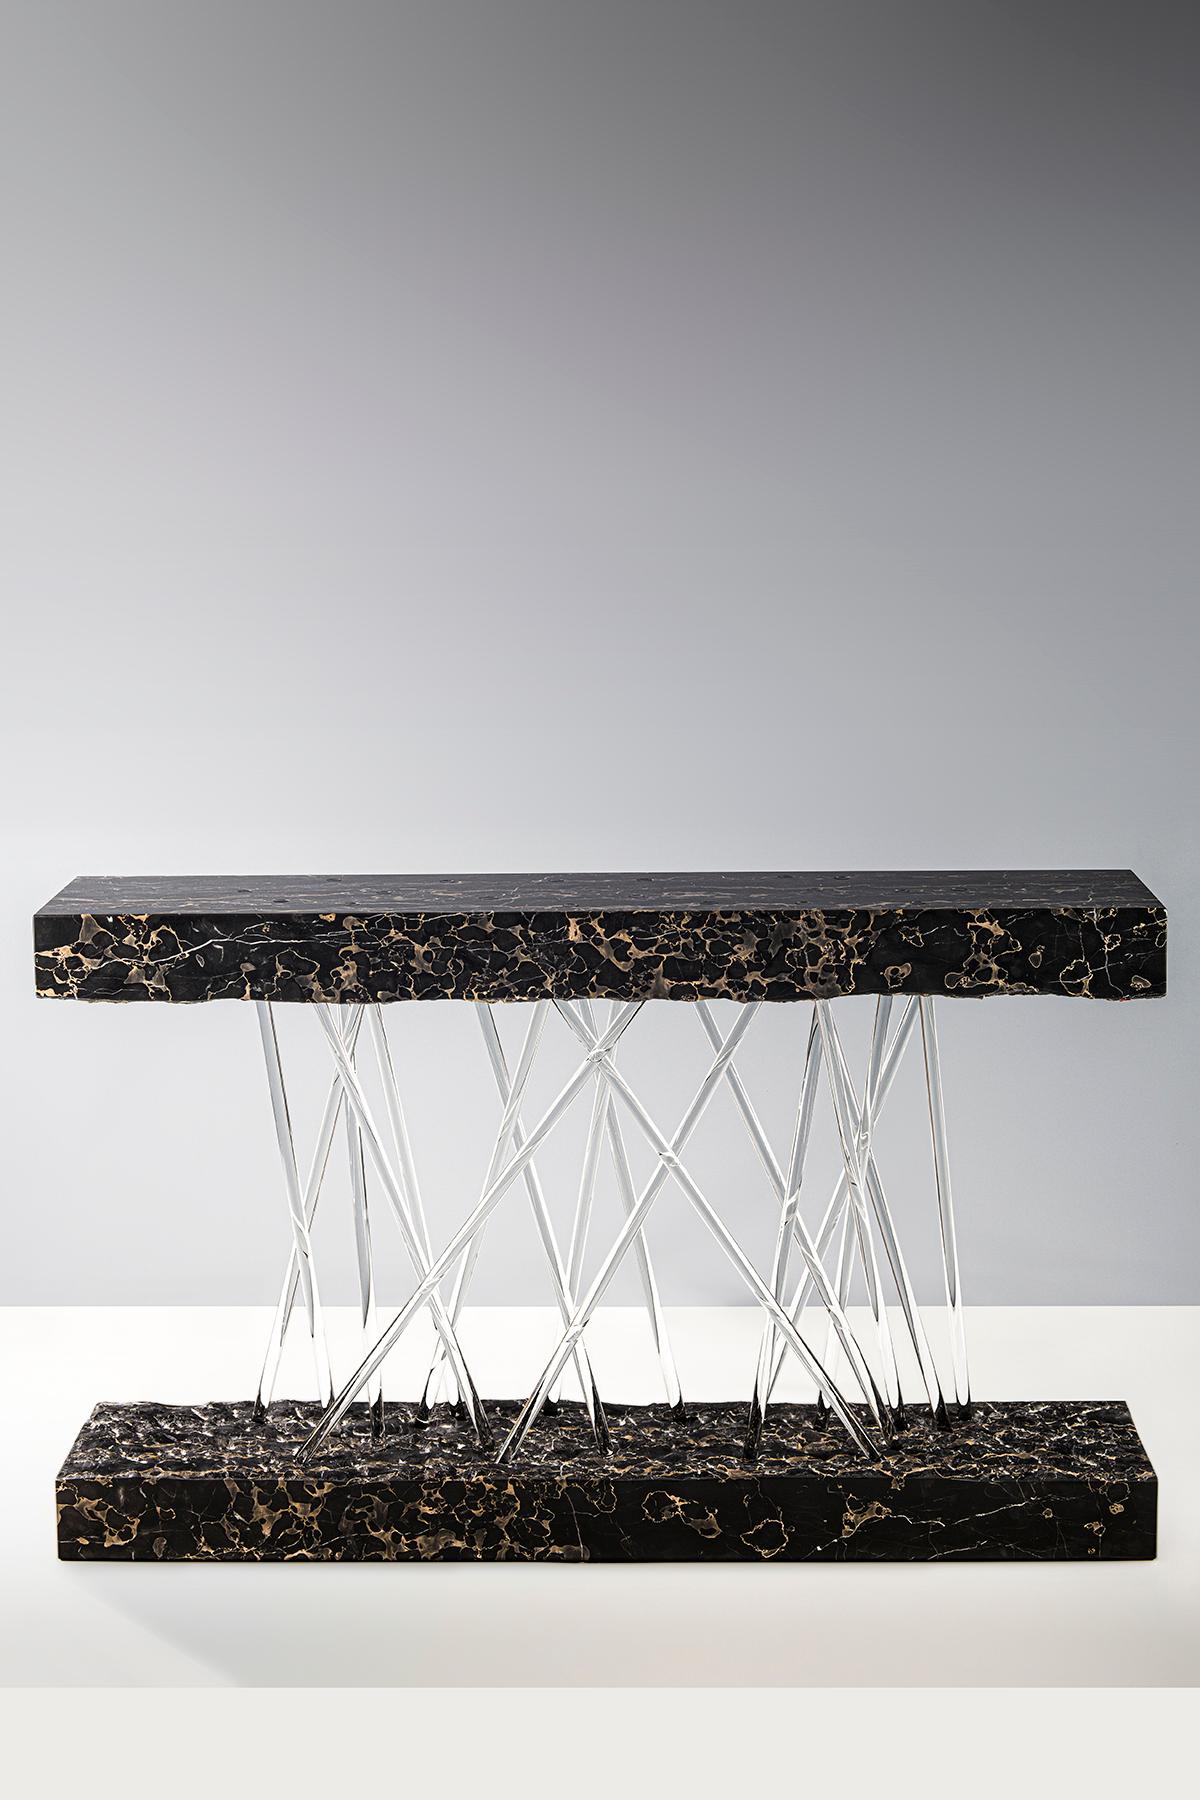 Rectangular console composed of one black Portoro marble block with gold and grey veining marble block separated into two parts, the top is supported only by criss-crossing Borosilicate glass rods below which are set into the bottom part.
Model